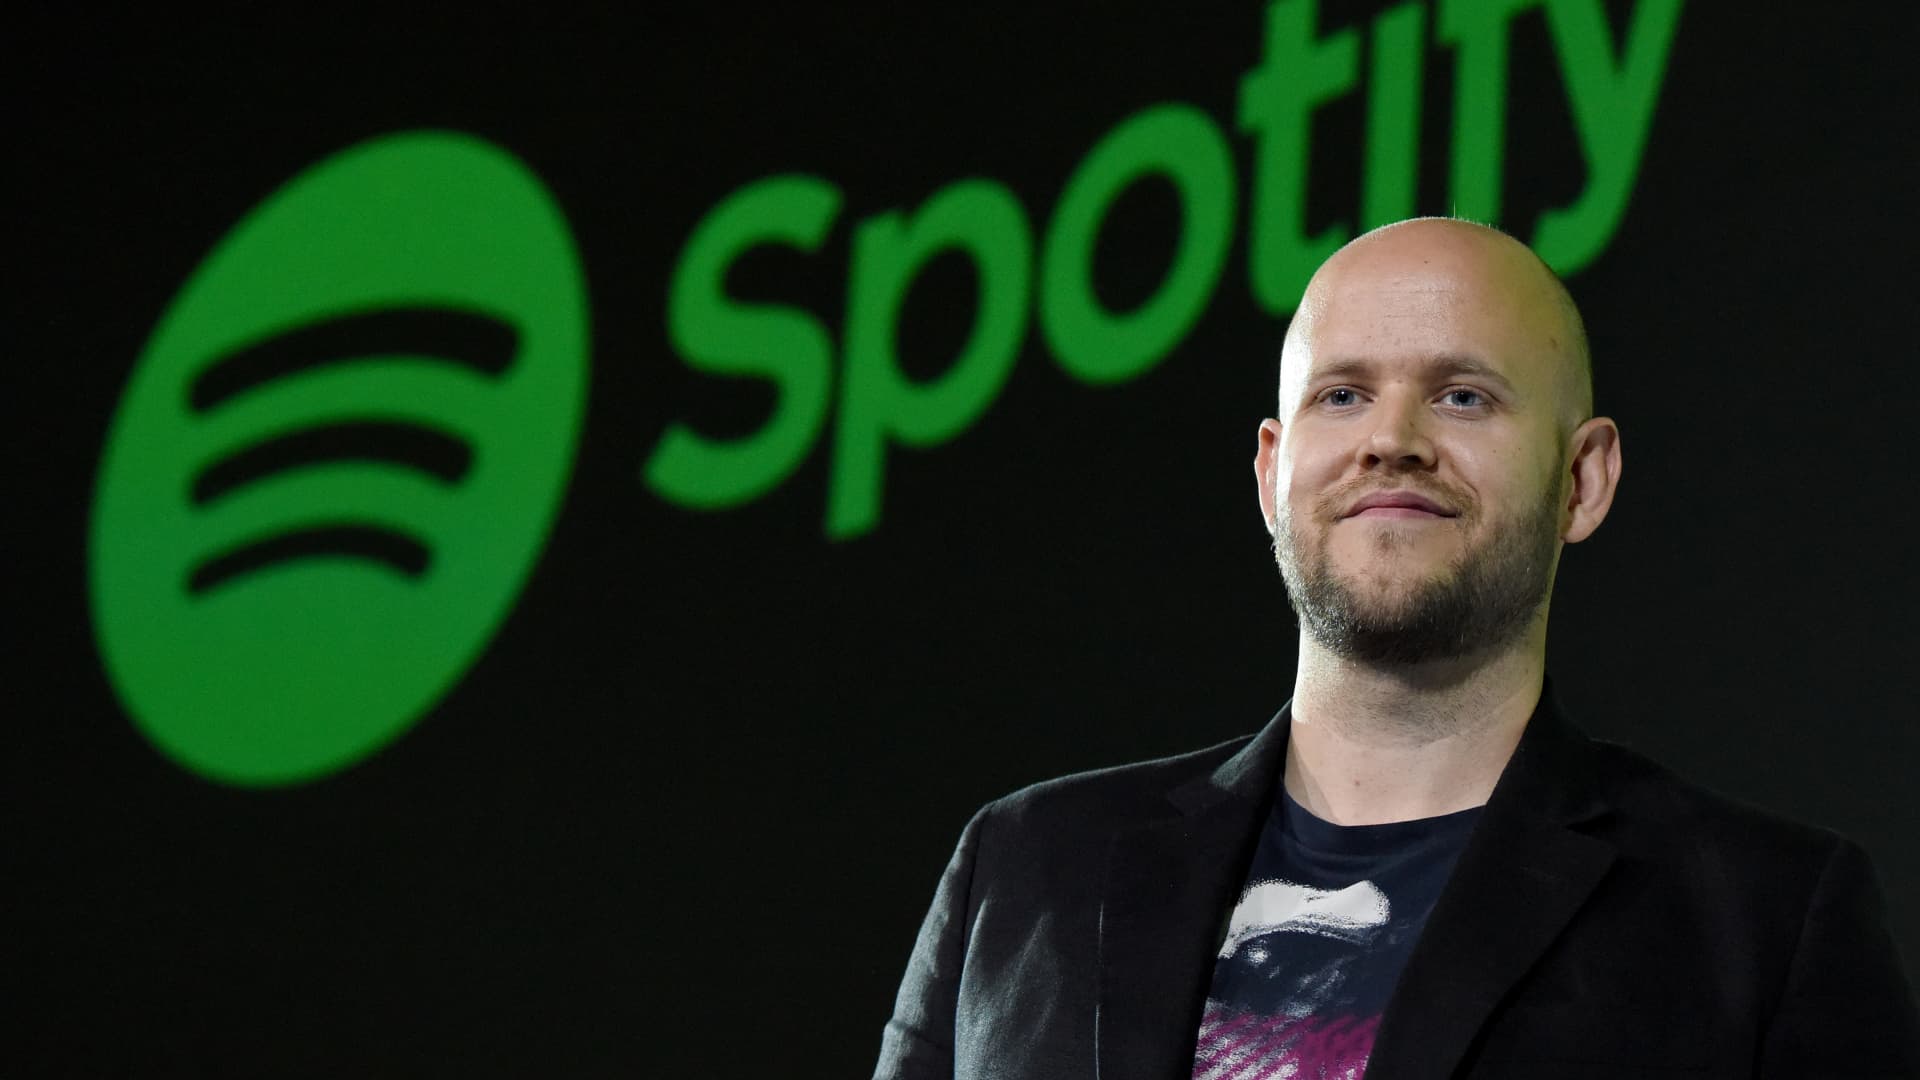 Spotify to cut 6% of its workforce as tech layoffs continue